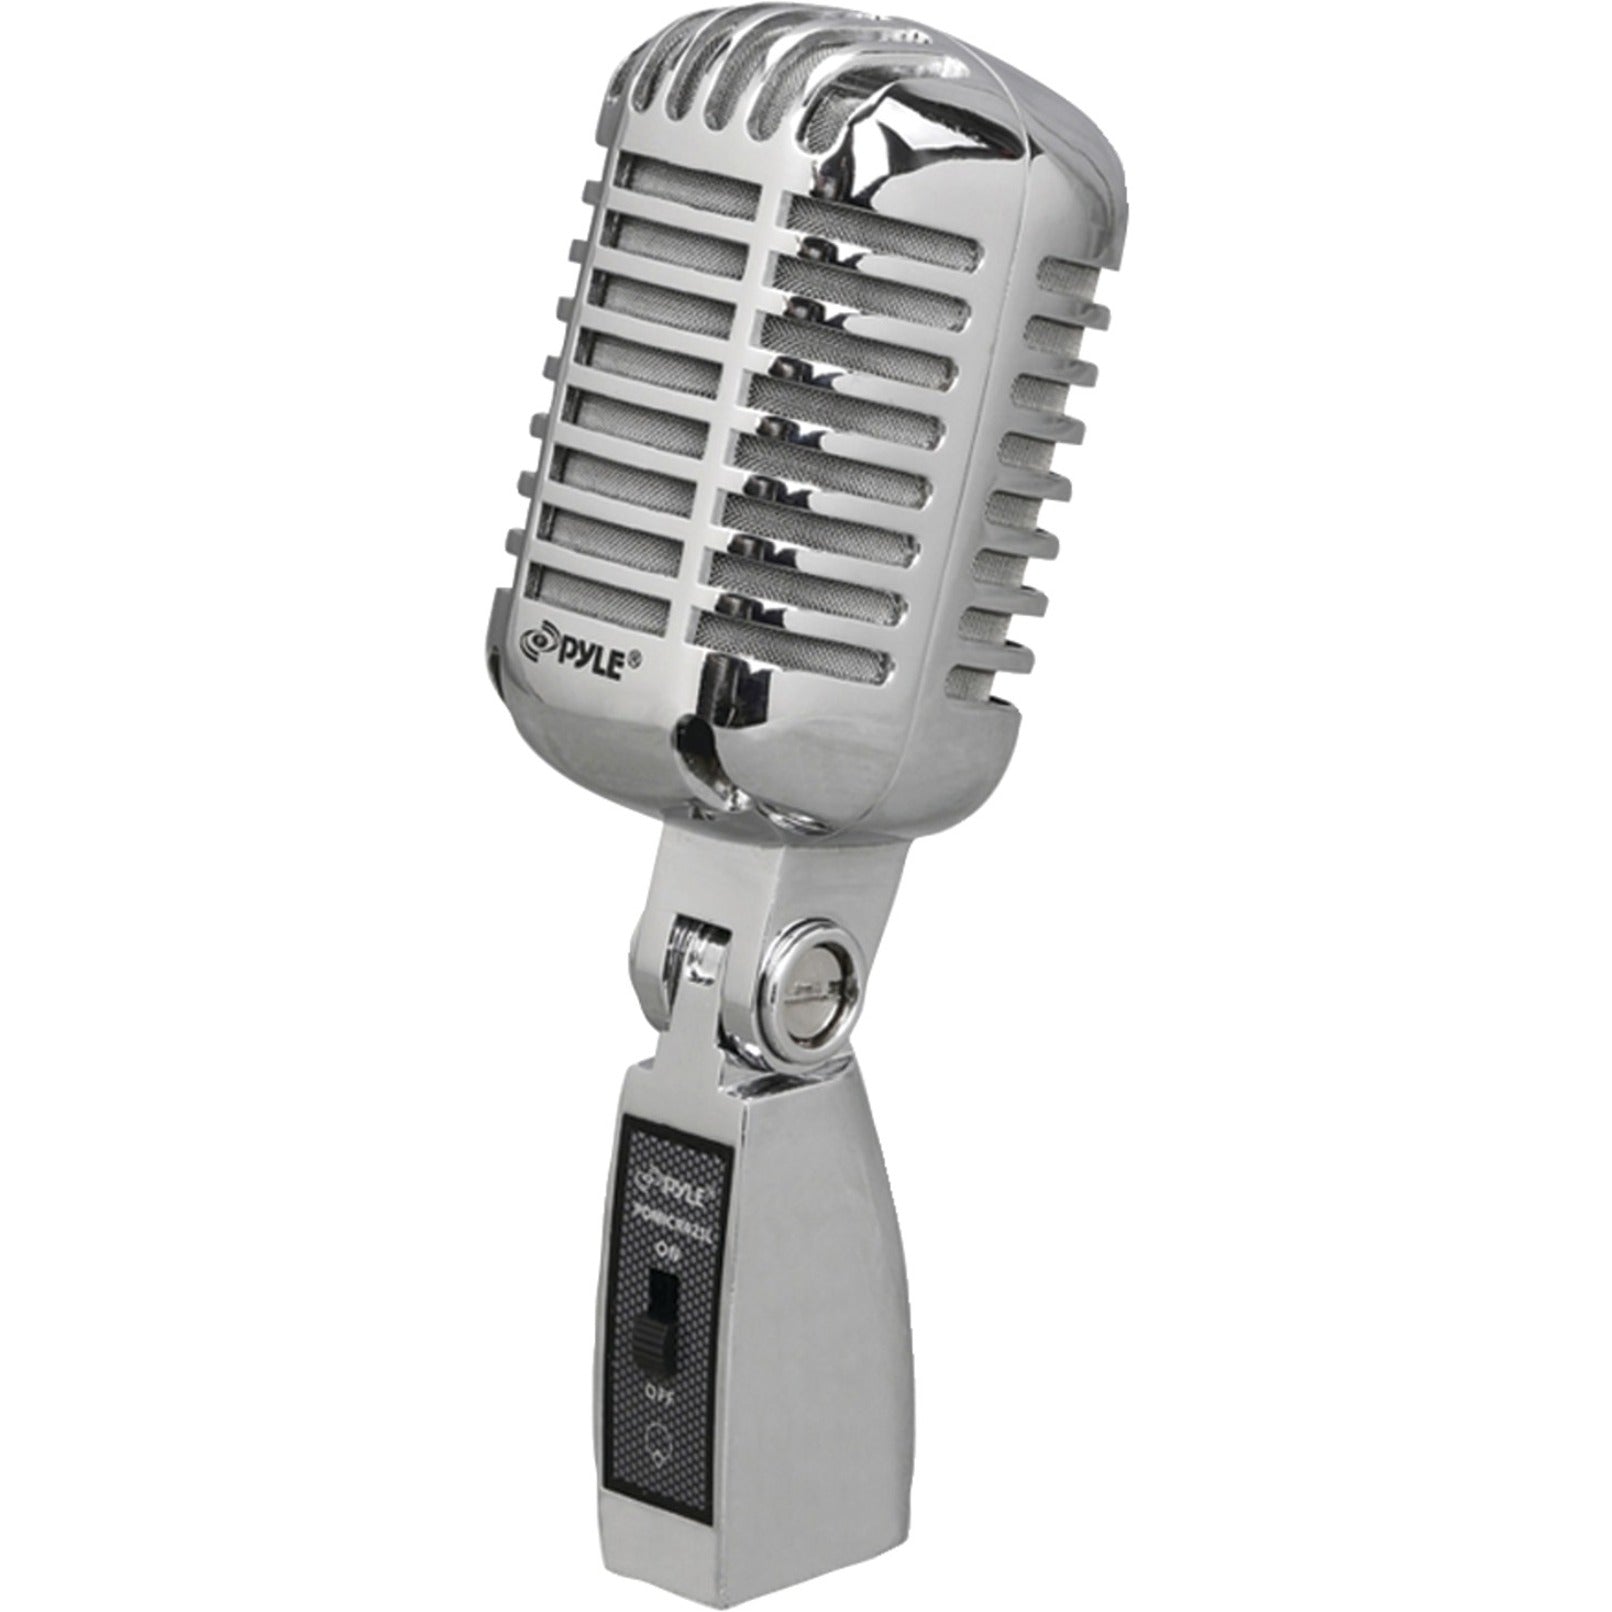 PylePro PDMICR42SL Classic Retro Microphone, Wired Dynamic Microphone - Silver